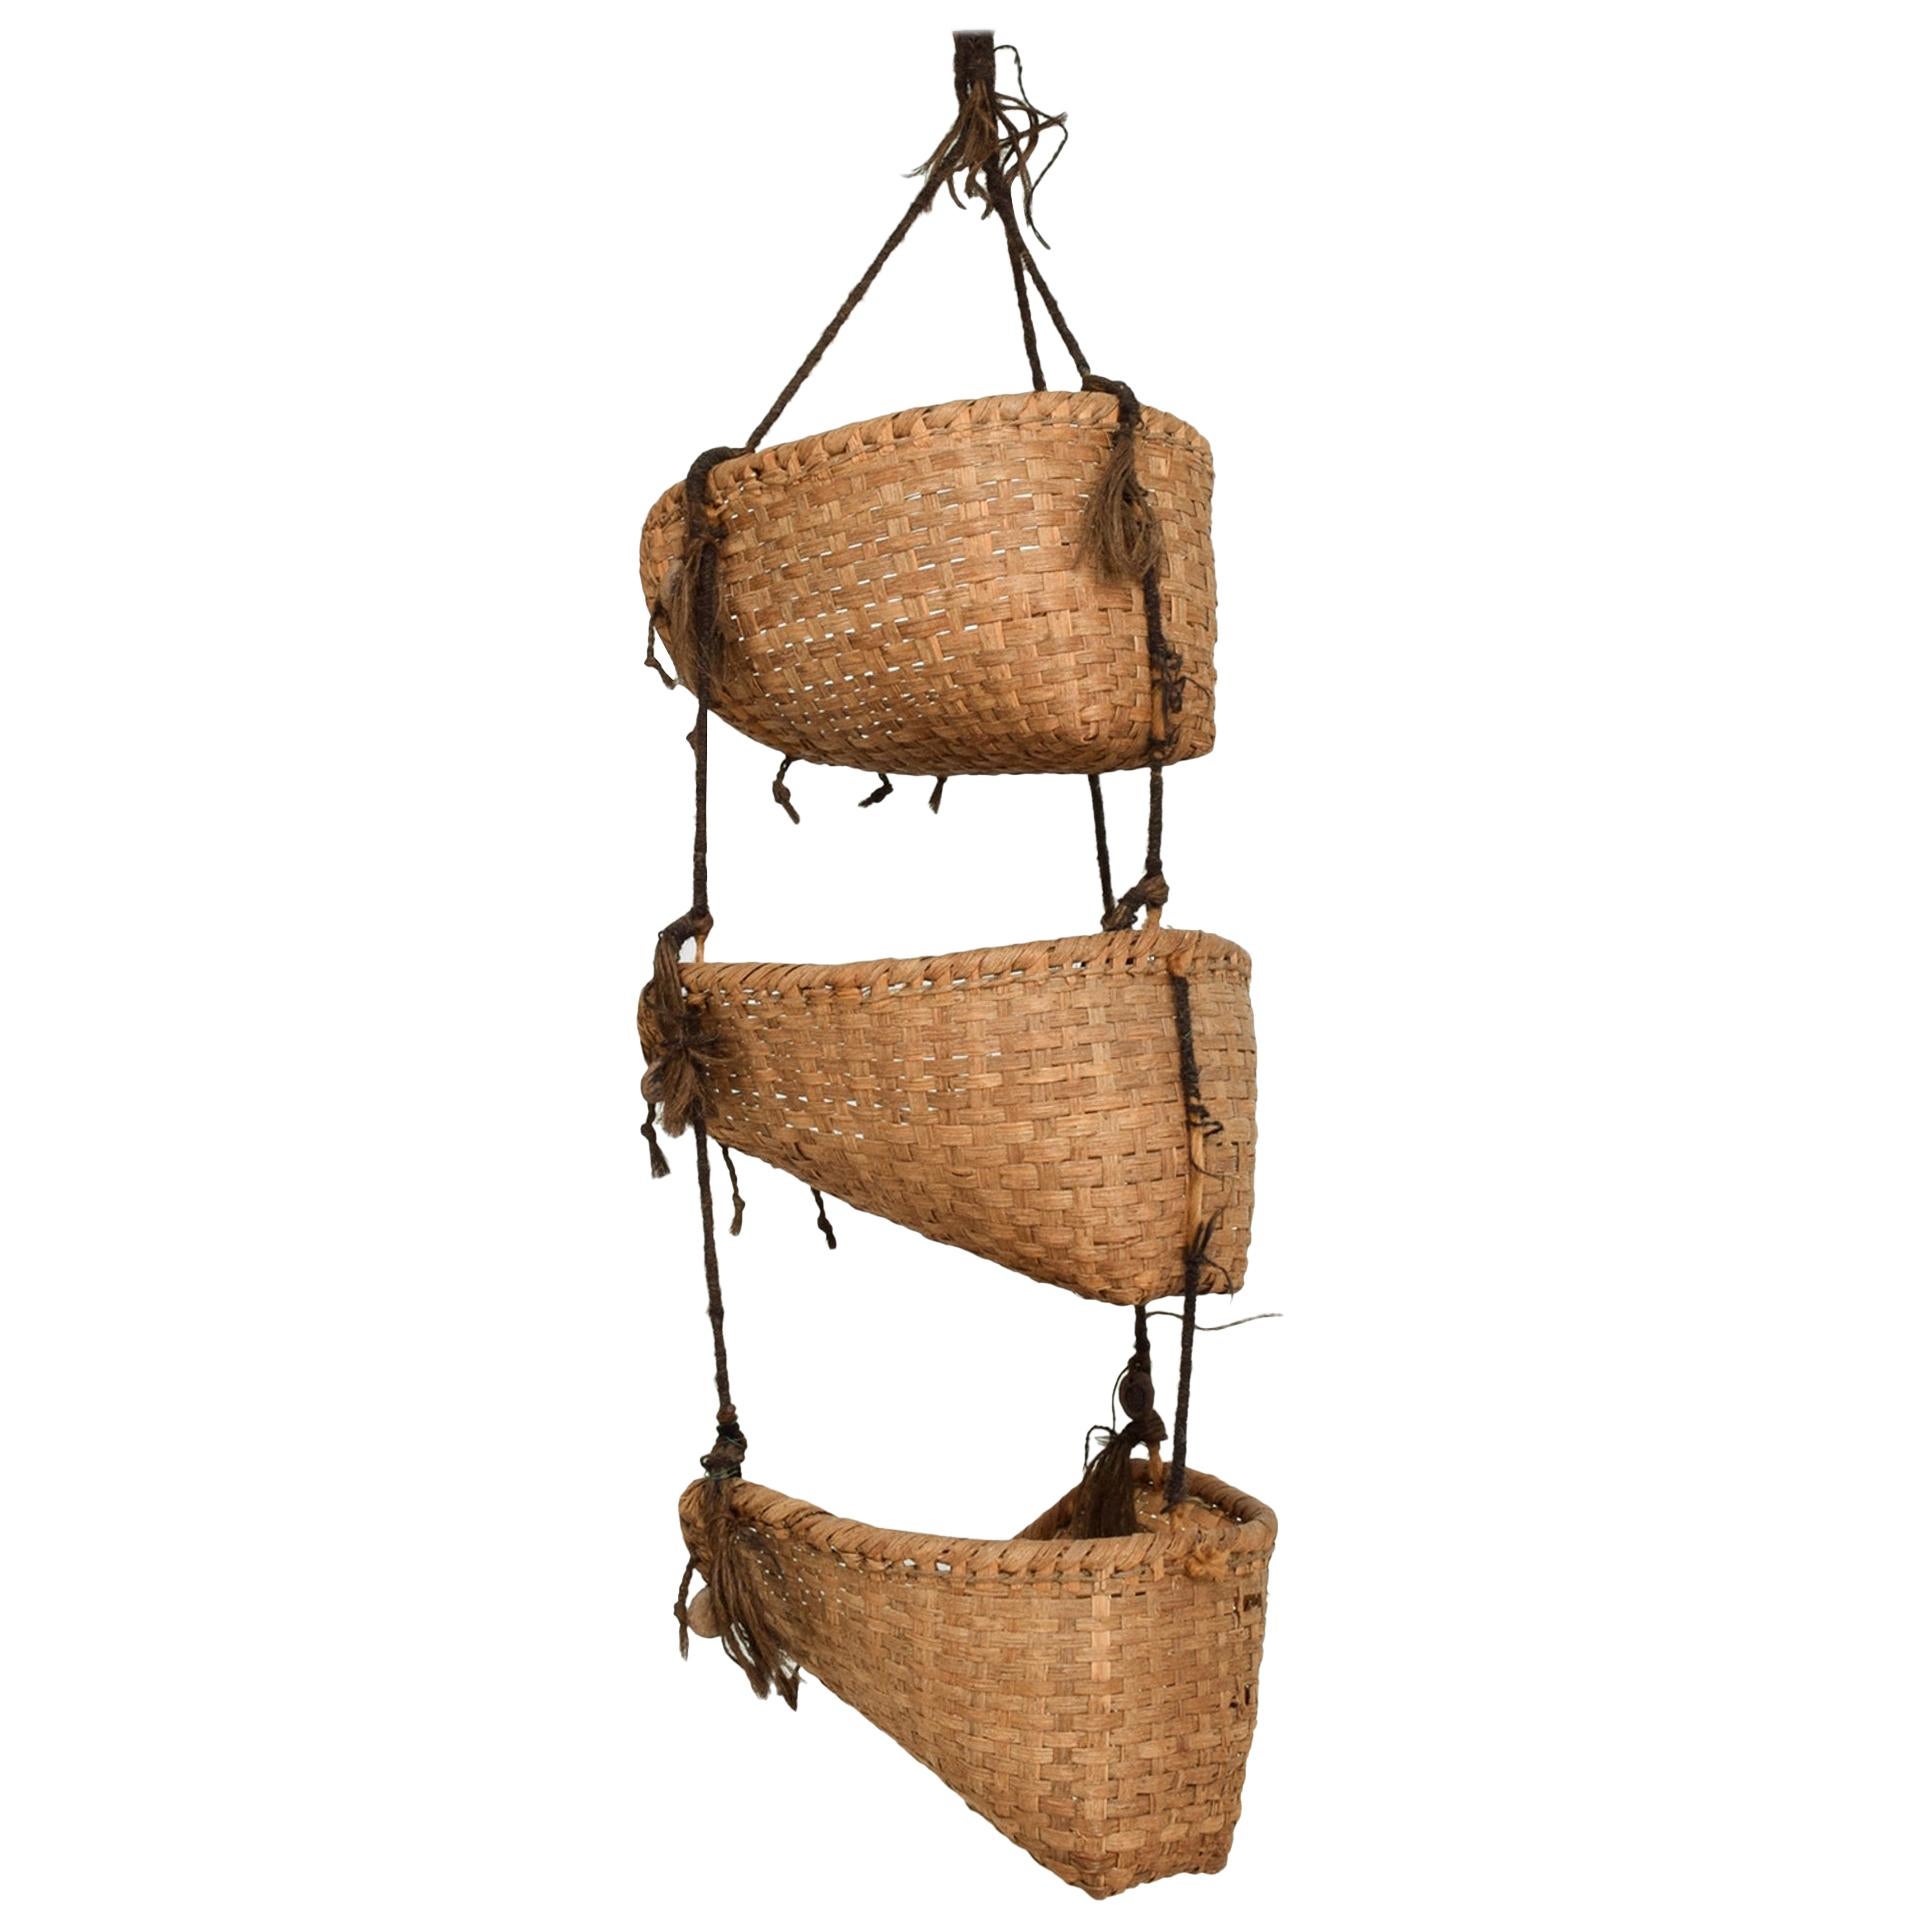 Folk Art
Handcrafted textile fiber art wall hanging with three storage nesting pockets
Hand woven basket pouches connected with a medley of fibers incorporating wool and animal hair each features a uniquely designed pottery medallion.
Wall